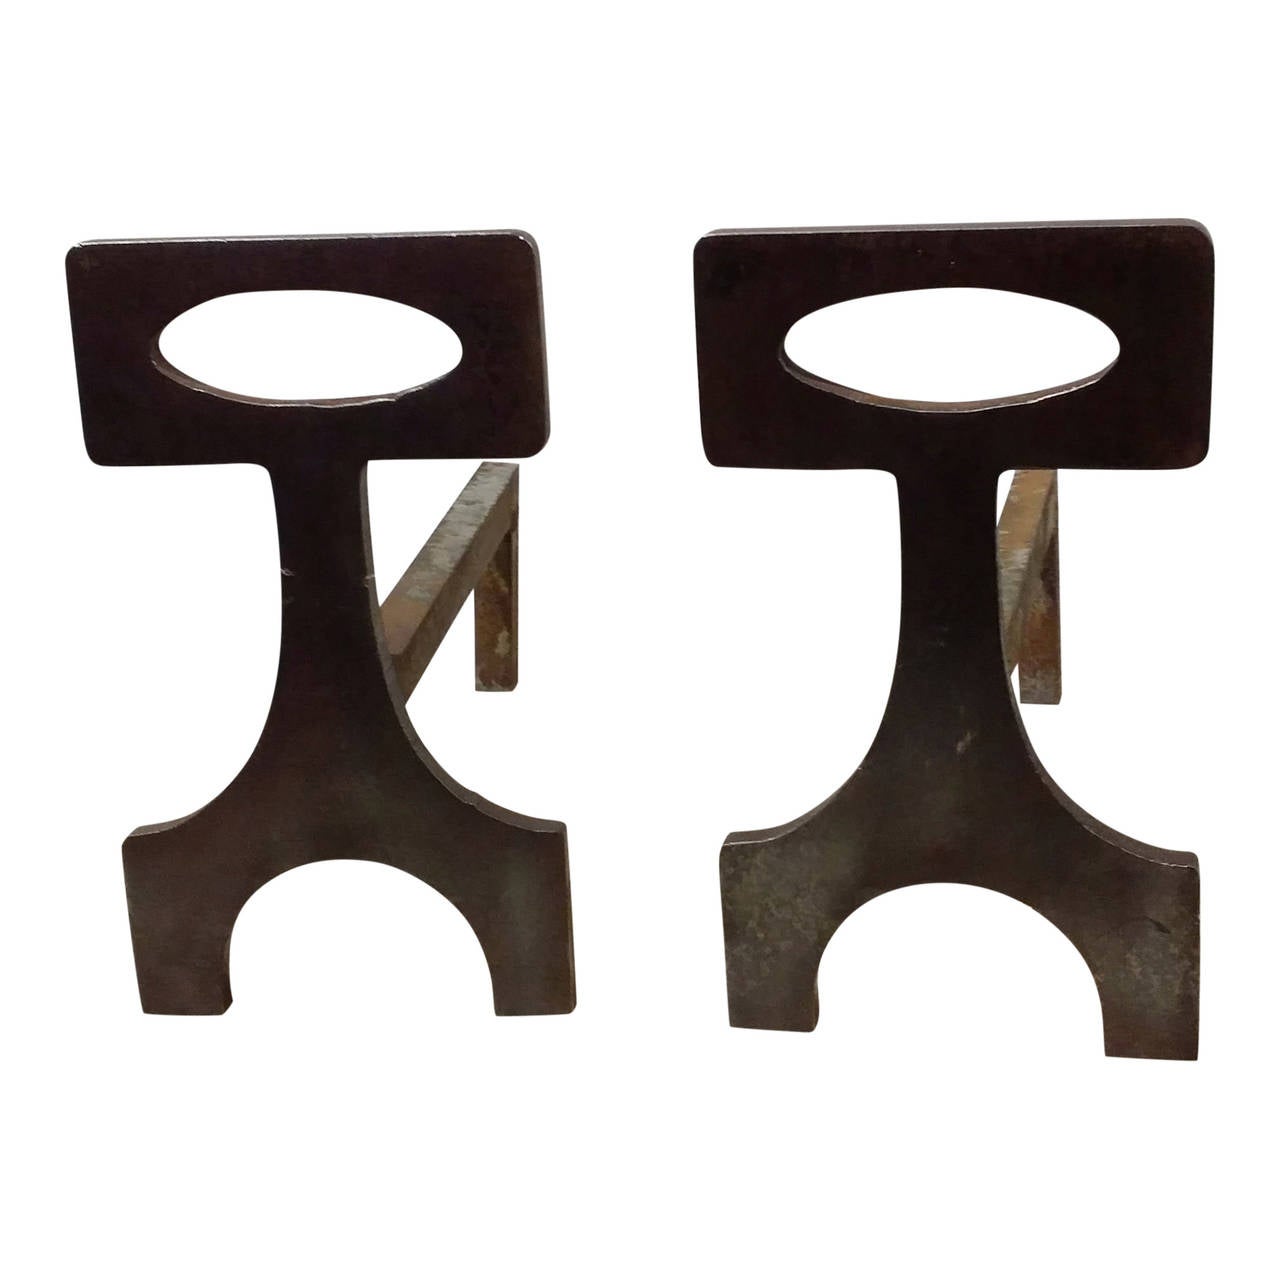 Solid iron pair of Minimalist andirons
Surface oxydation
Surface has intentionally left unpolished to keep vintage accent
Very minor dents.